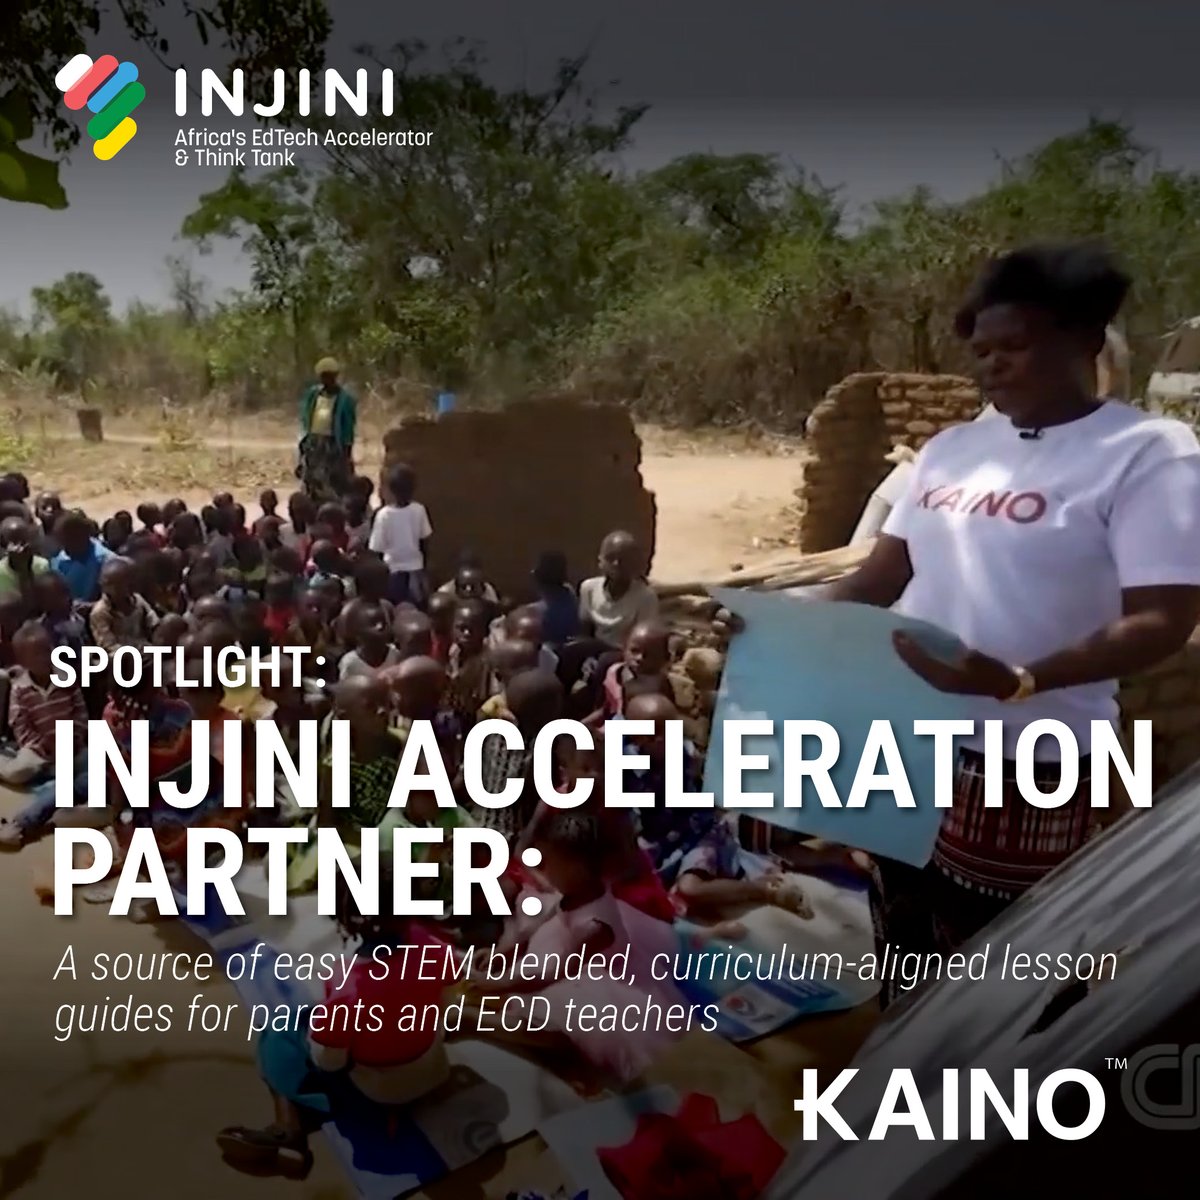 Meet @KAINOafrica, an ECD EdTech startup founded in Uganda. KAINOafrica has joined Injini’s Acceleration Partnership Programme for 2022/2023. We’re looking forward to working with the team to accelerate the product offering. #accelerationpartneship #africanedtech